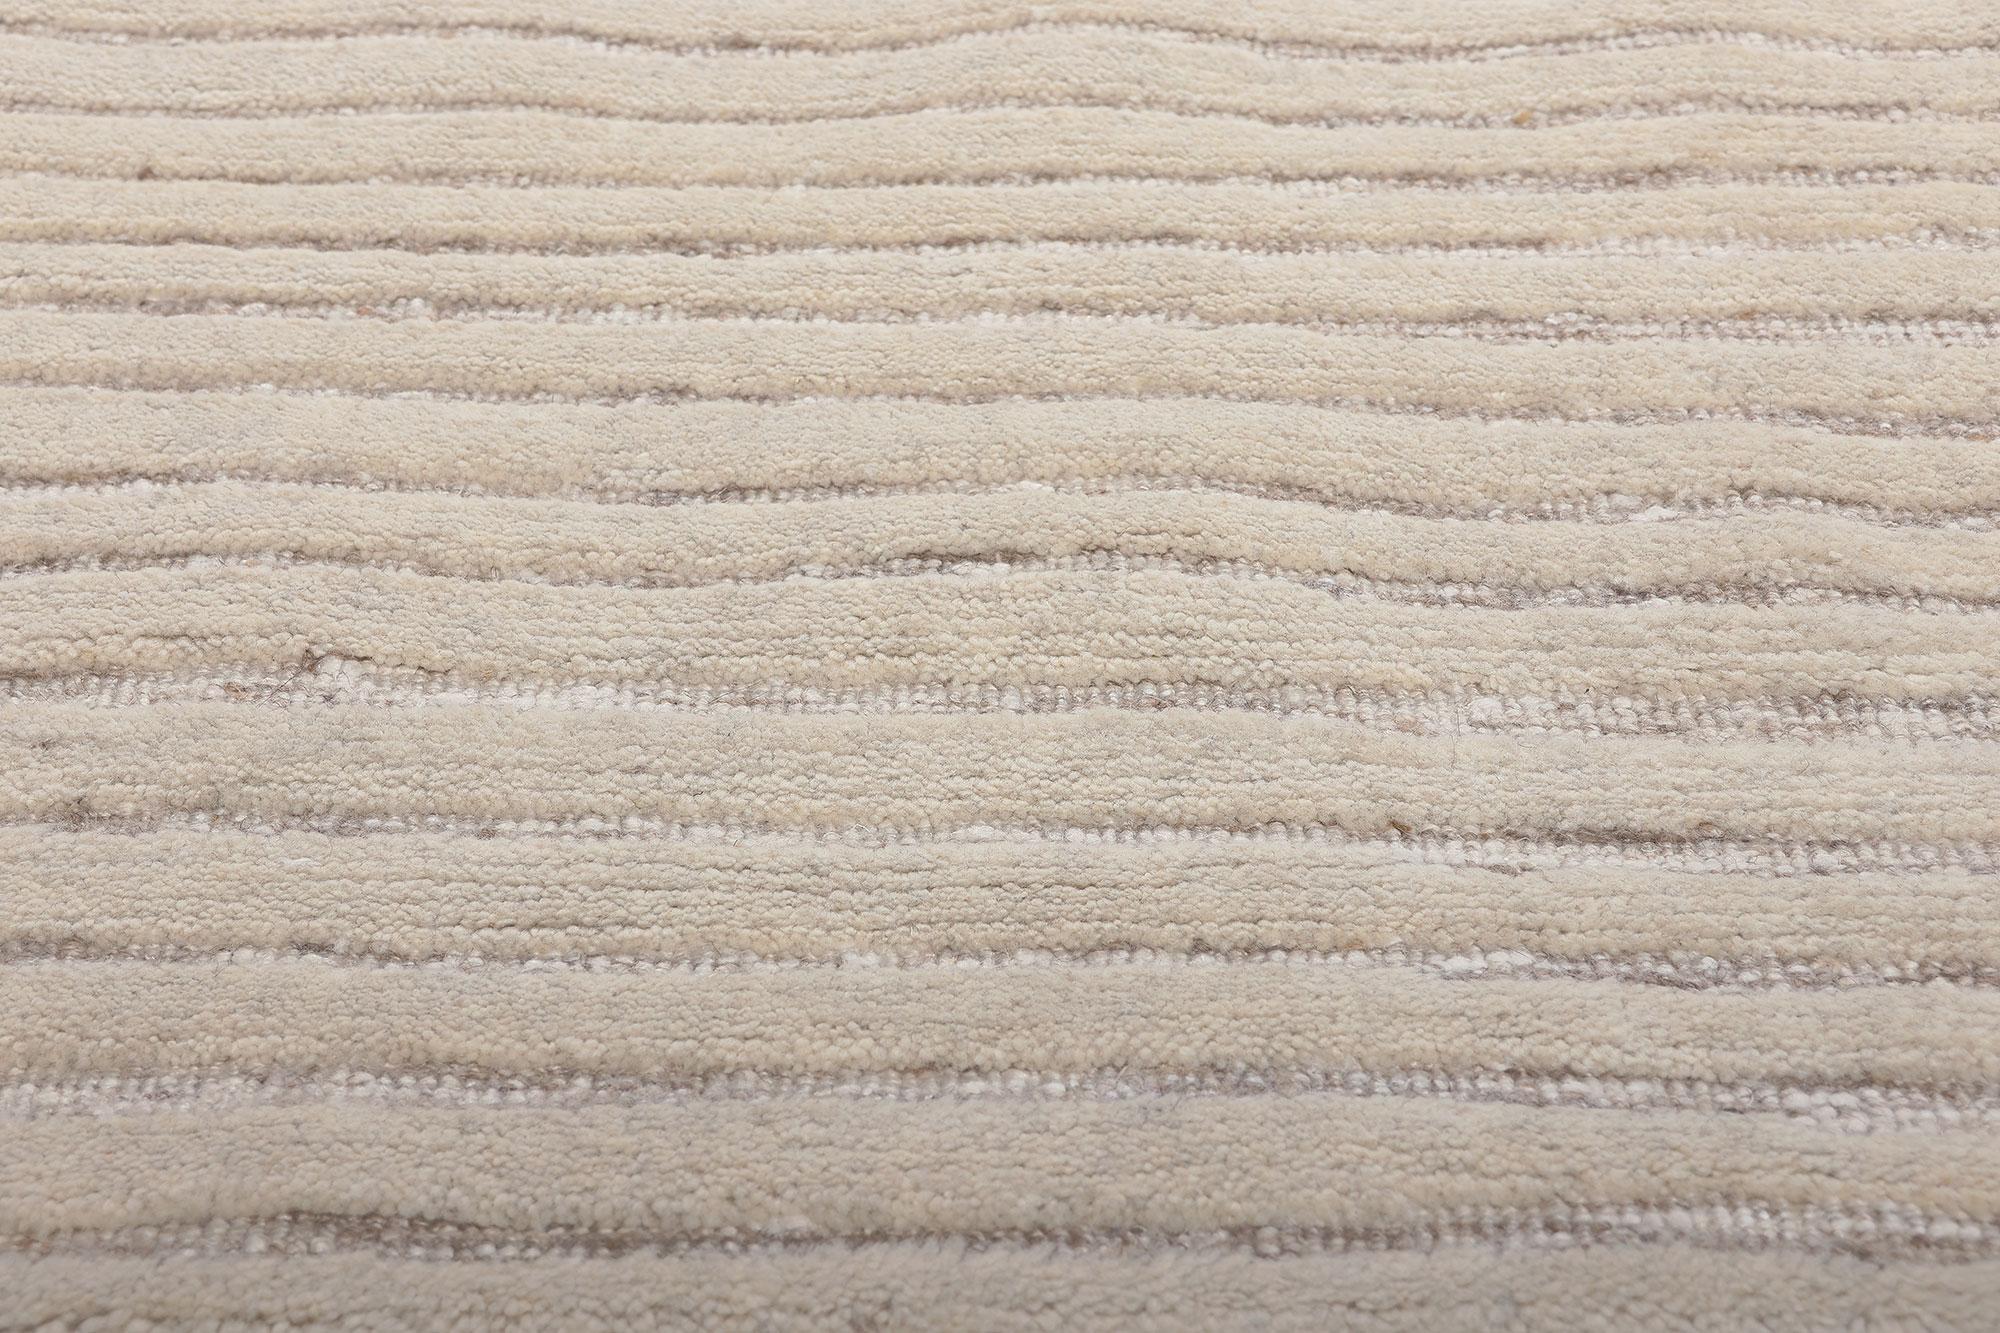 Hand-Woven Modern Textured High-Low Rug, Sublime Simplicity Meets Tantalizing Texture